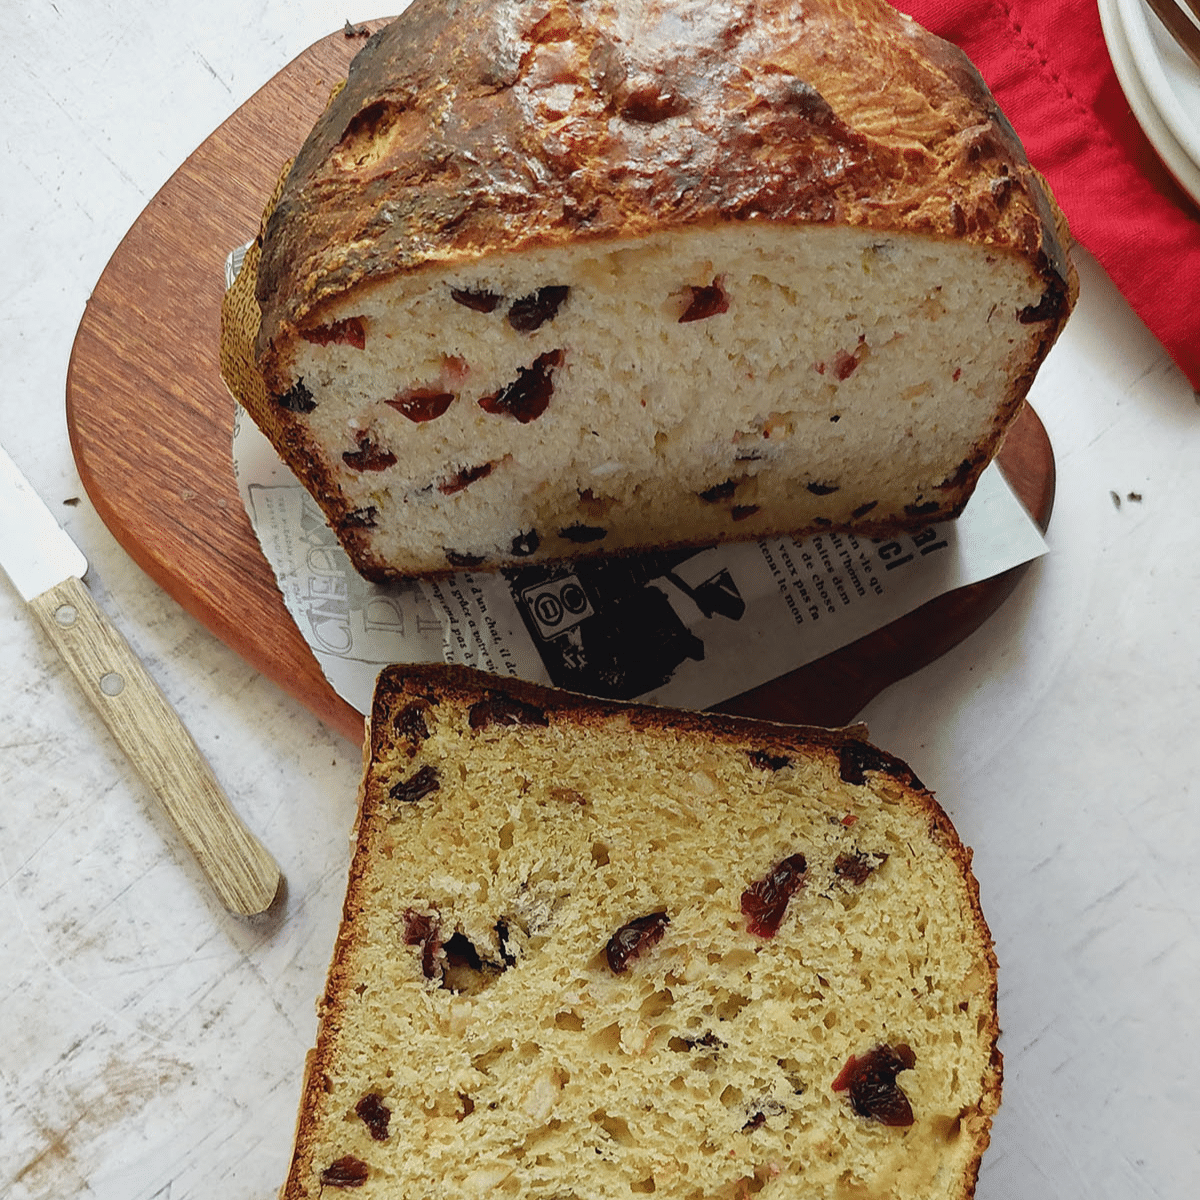 Indulge in the festive joy as you savor the buttery and delicious taste of this classic No Knead Italian Sweet Bread known as Panettone.